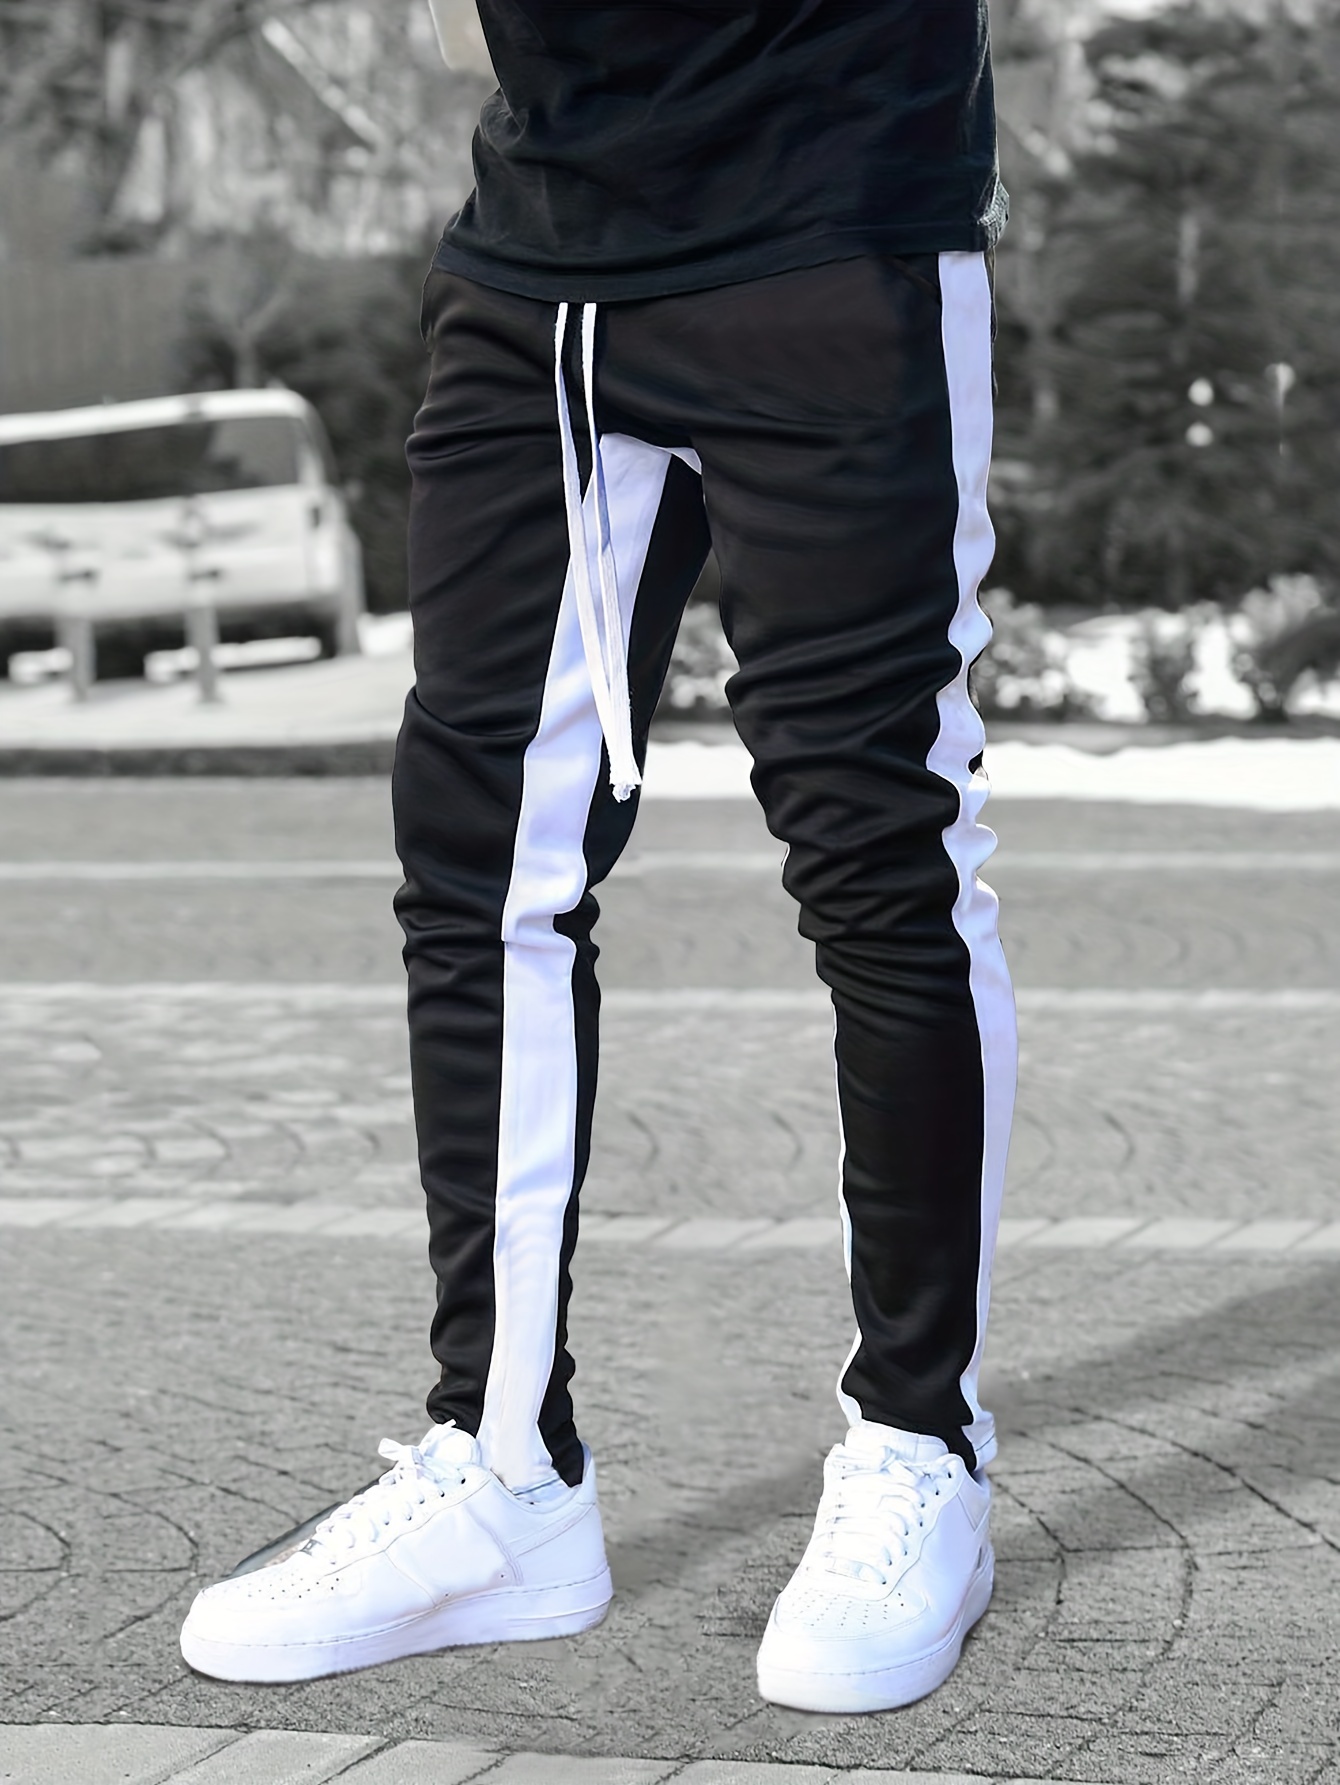 Affordable Wholesale striped sweatpants For Trendsetting Looks 